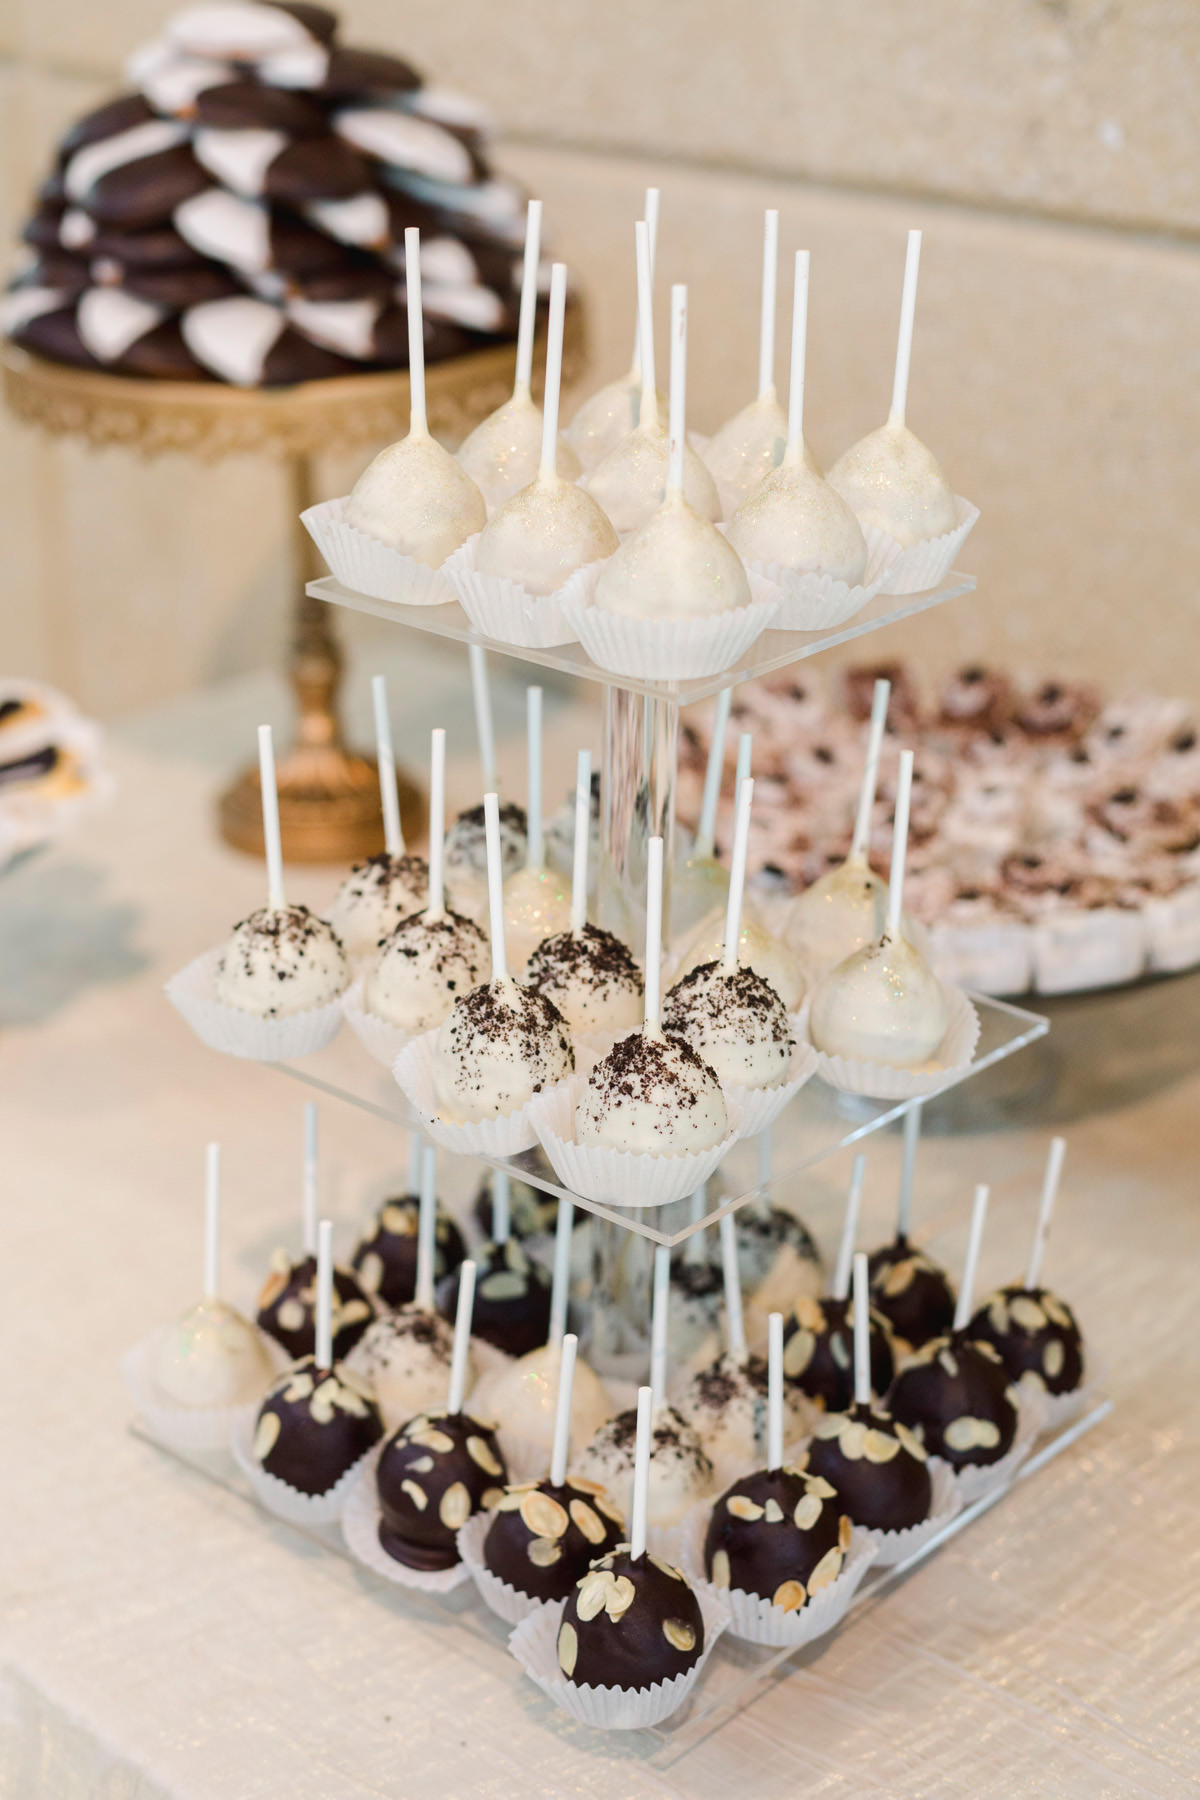 Wedding Dessert Bar Display with Cheesecake Pops and Cookies | Alessi Bakery